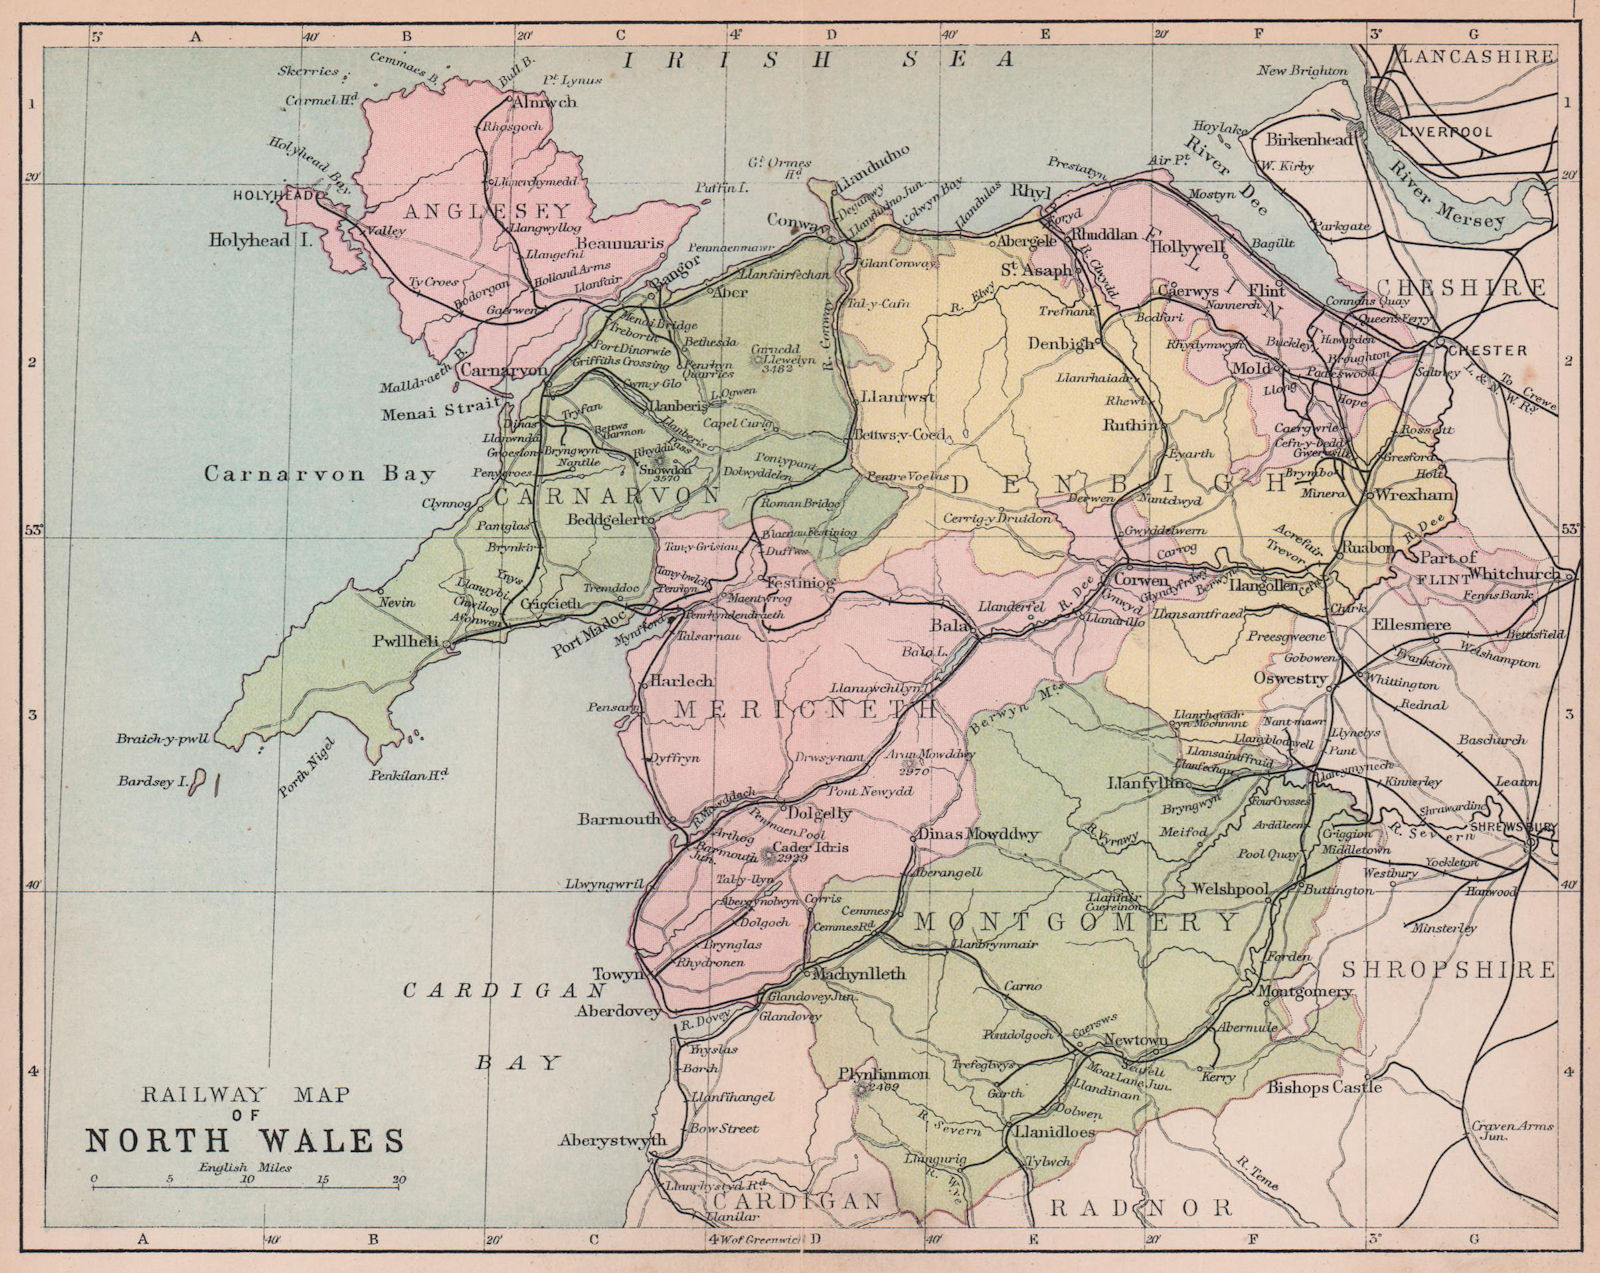 Associate Product WALES Railway Map of North Wales BARTHOLOMEW 1882 old antique plan chart